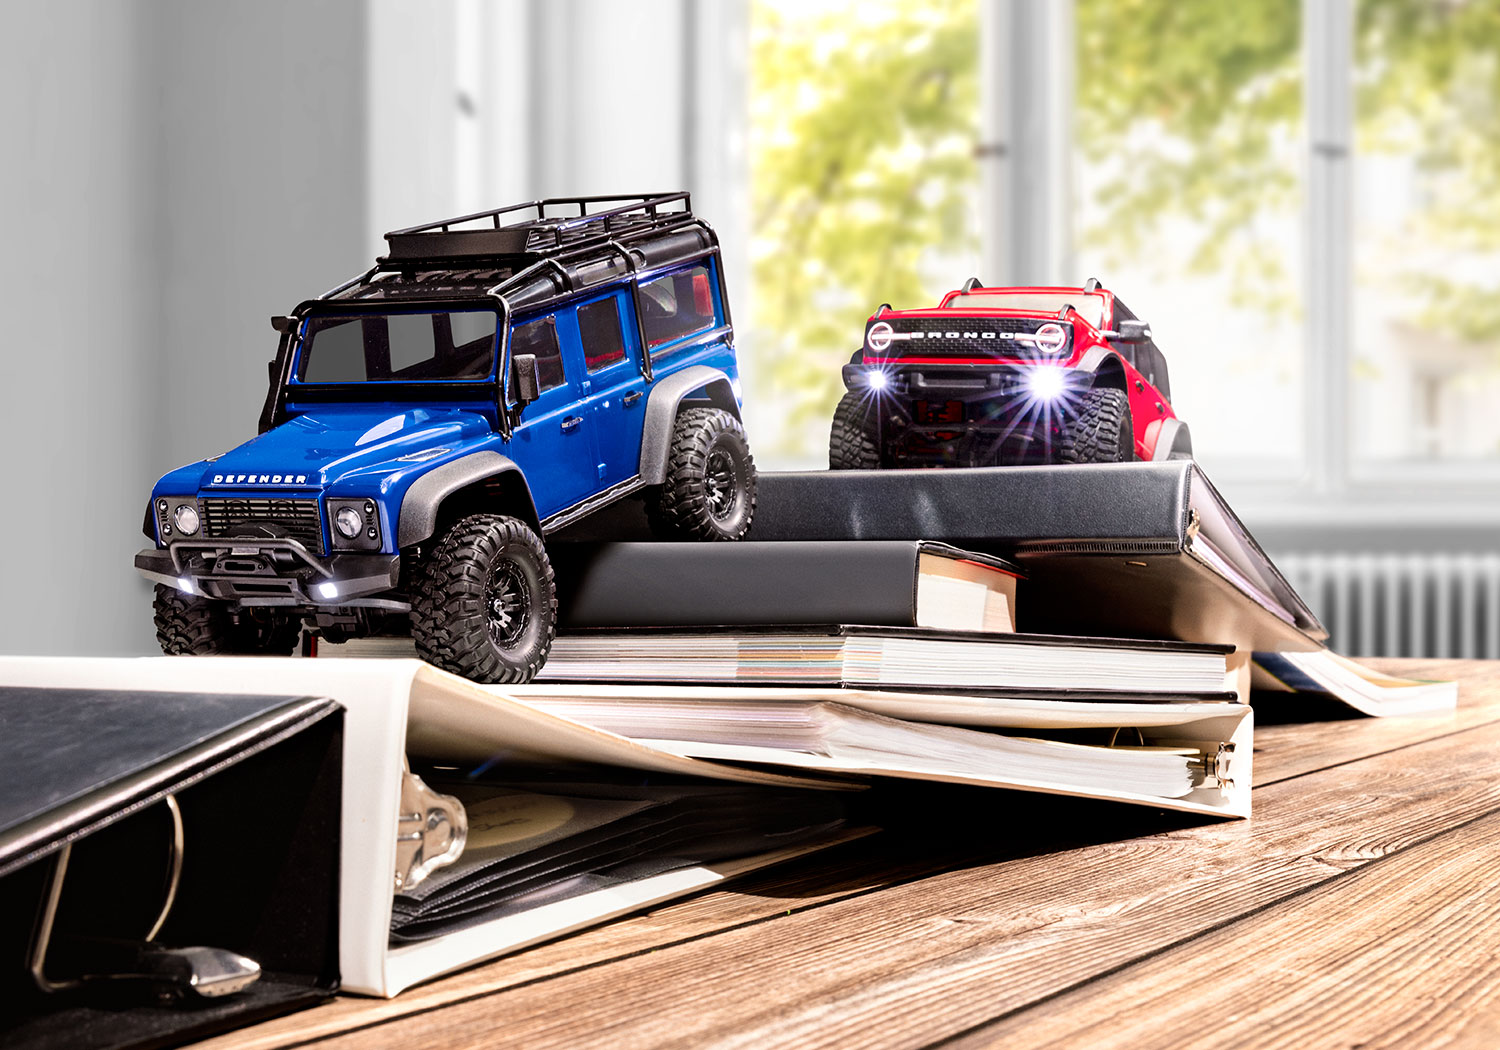 97054-1 | Traxxas TRX-4M 1/18 Land Rover Defender RTR Electric Off Road RC  Crawler